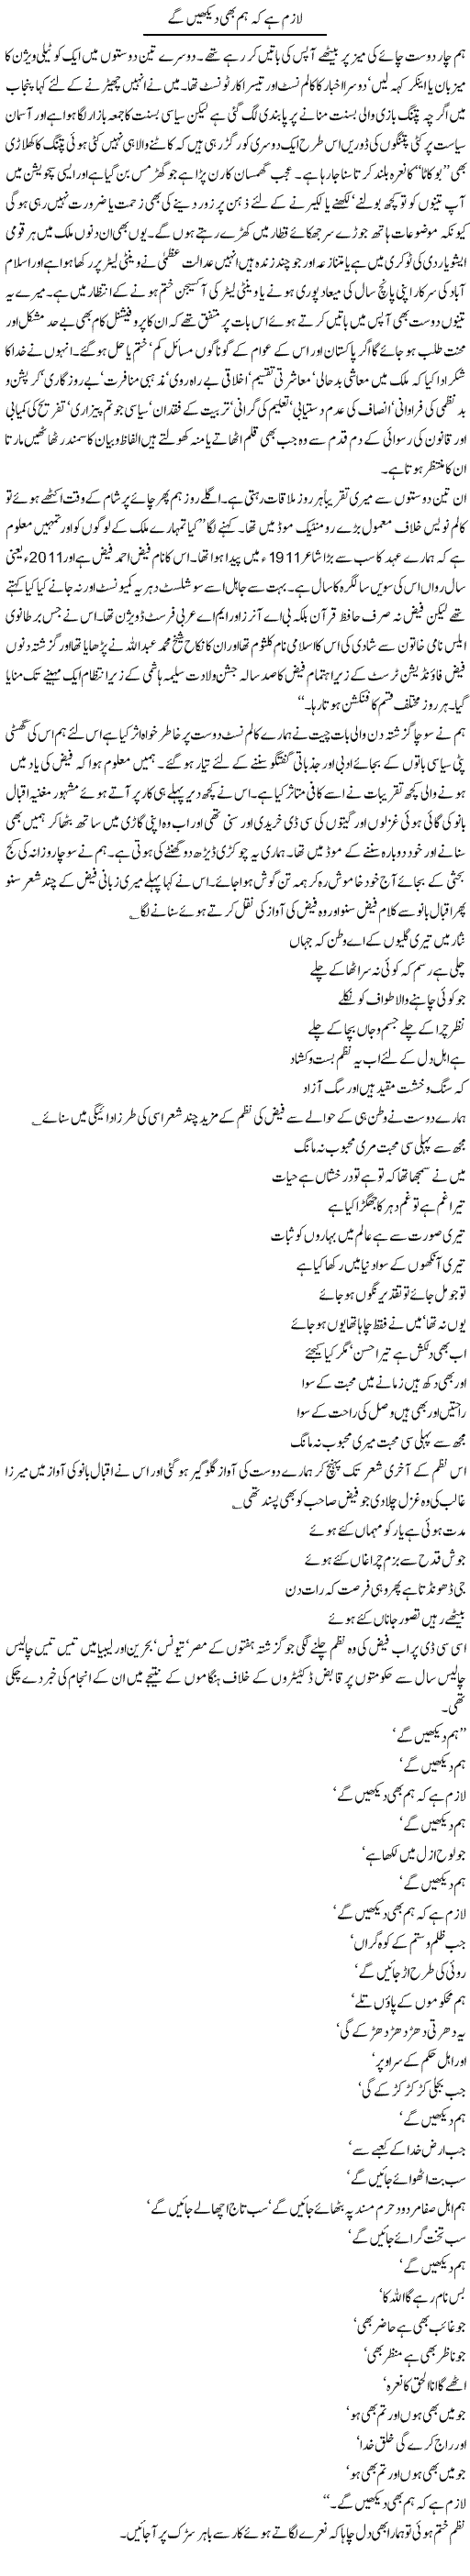 Political Basant Express Column Hameed Ahmed 4 March 2011